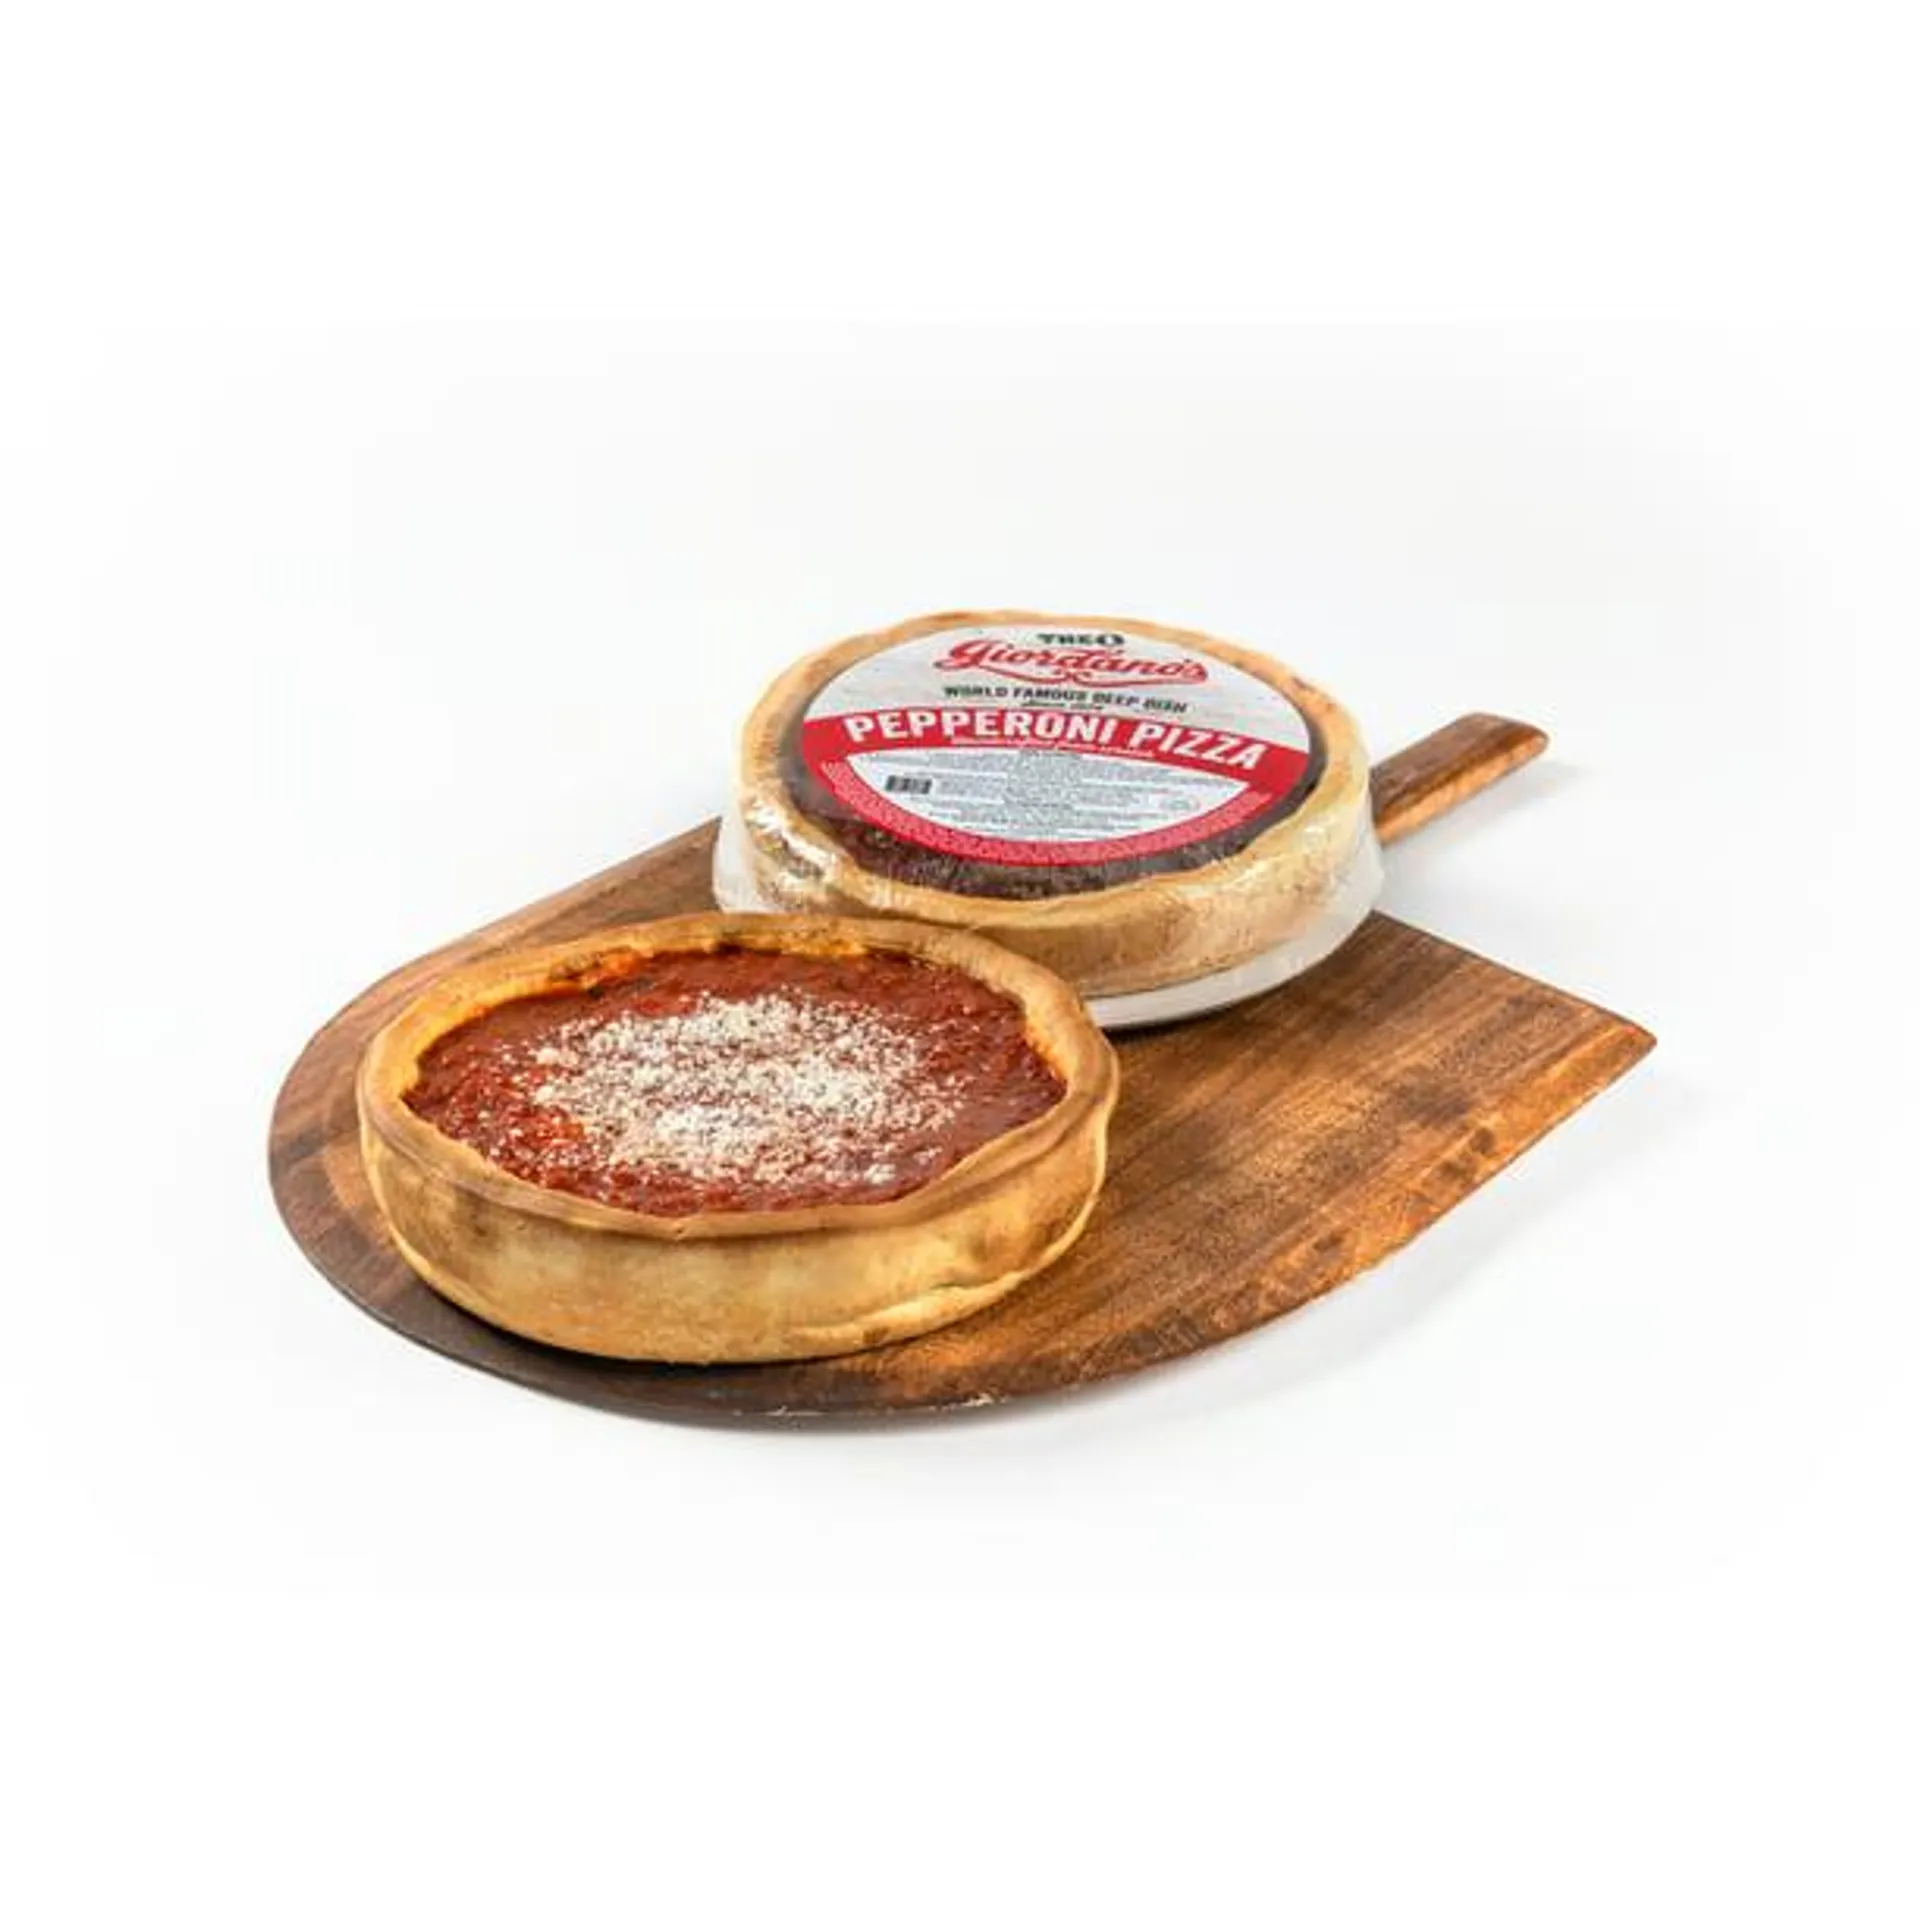 Giordano's Chicago Frozen 10" Deep Dish Stuffed Pizza, 2-pack (Cheese and Pepperoni)